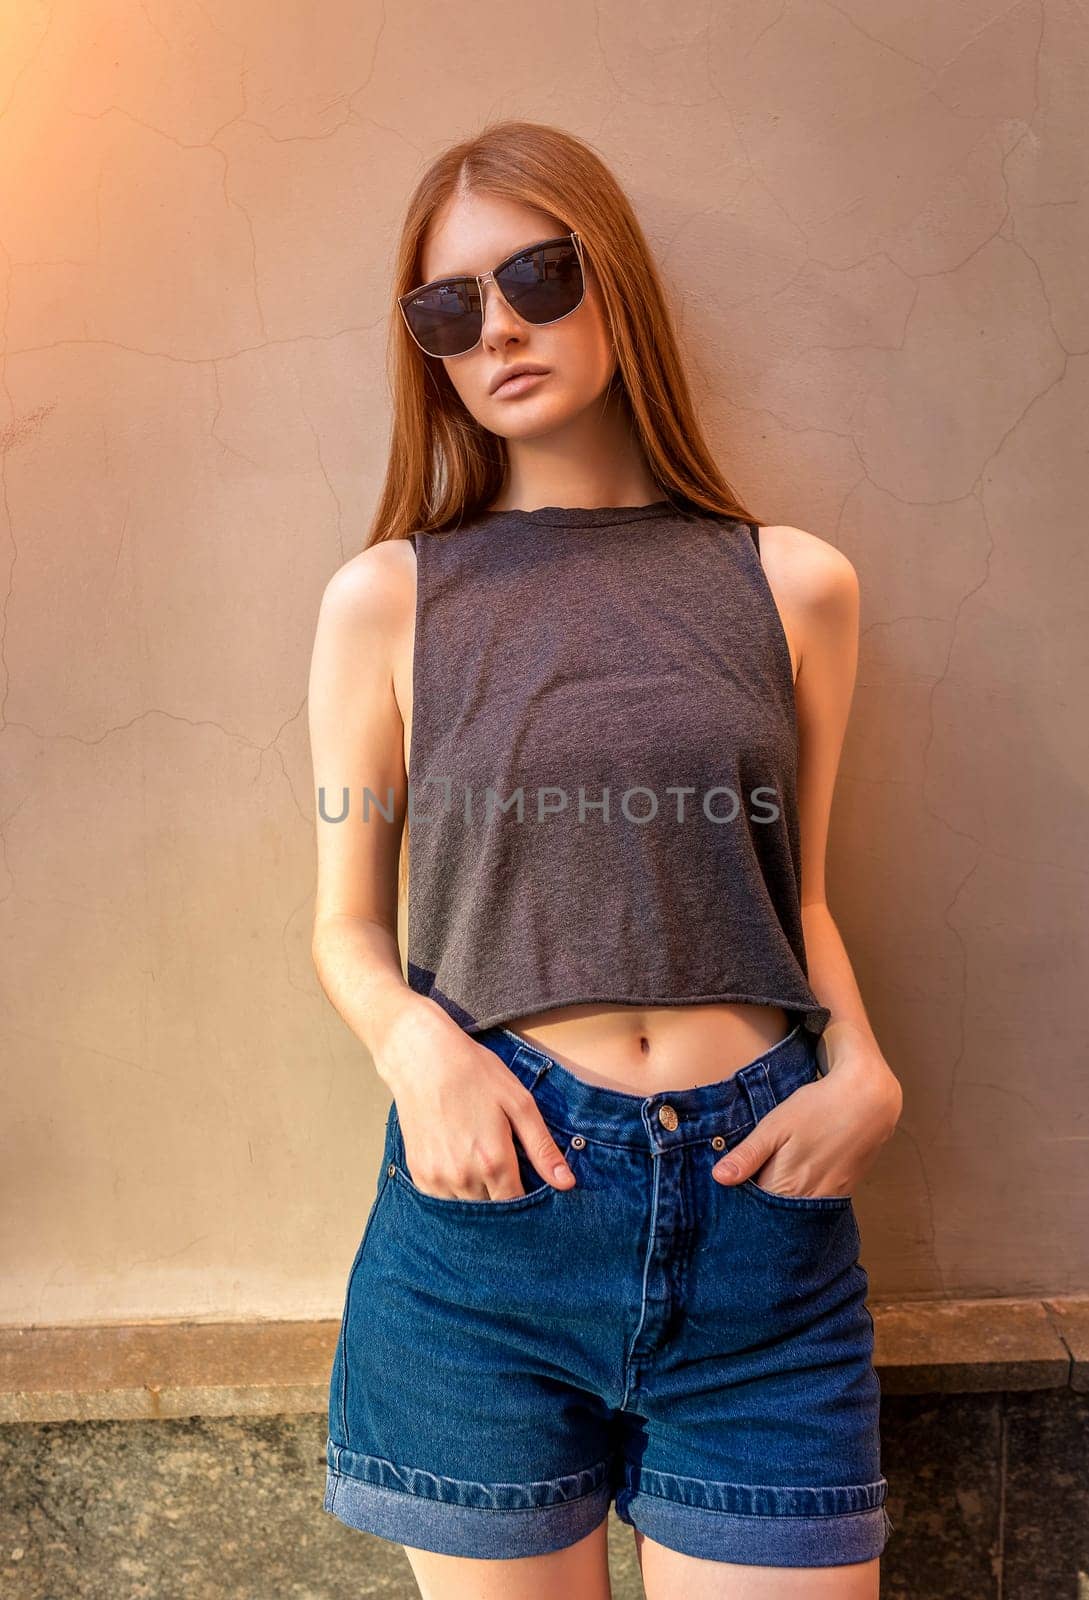 Portrait of Young Woman with Hands in Pockets on Wall Background. Trendy Urban Fashion Concept